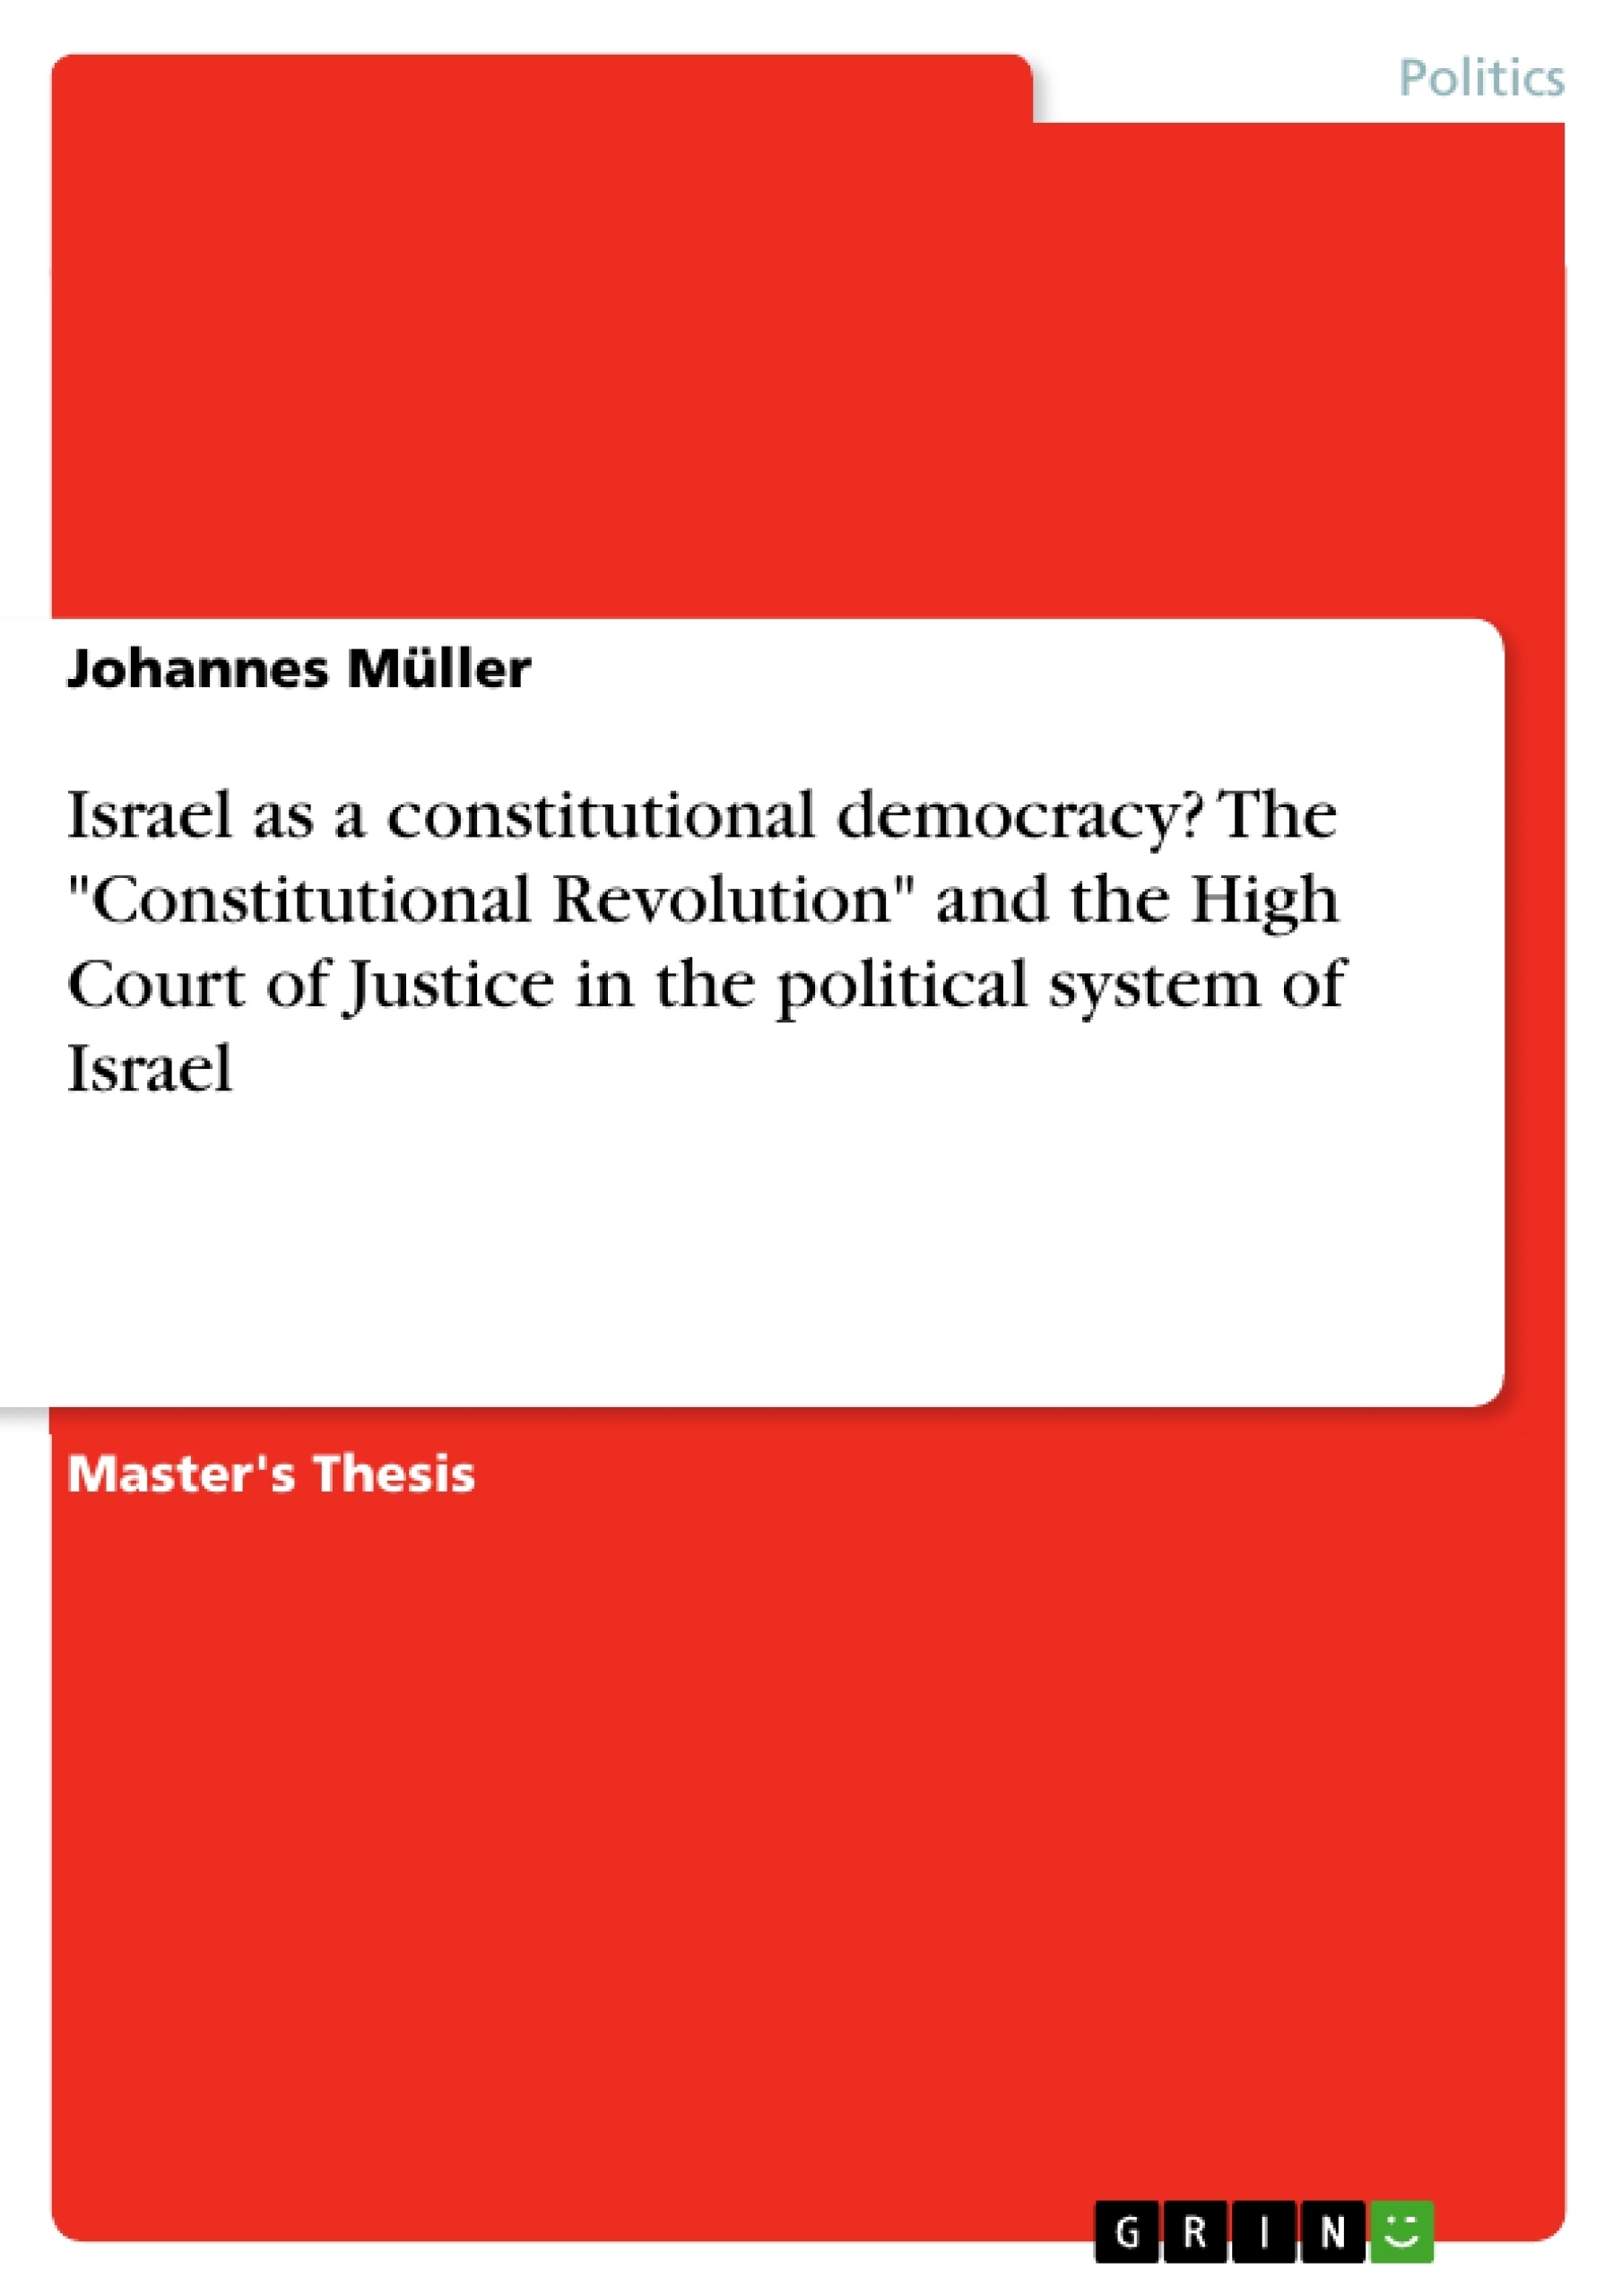 Título: Israel as a constitutional democracy? The "Constitutional Revolution" and the High Court of Justice in the political system of Israel